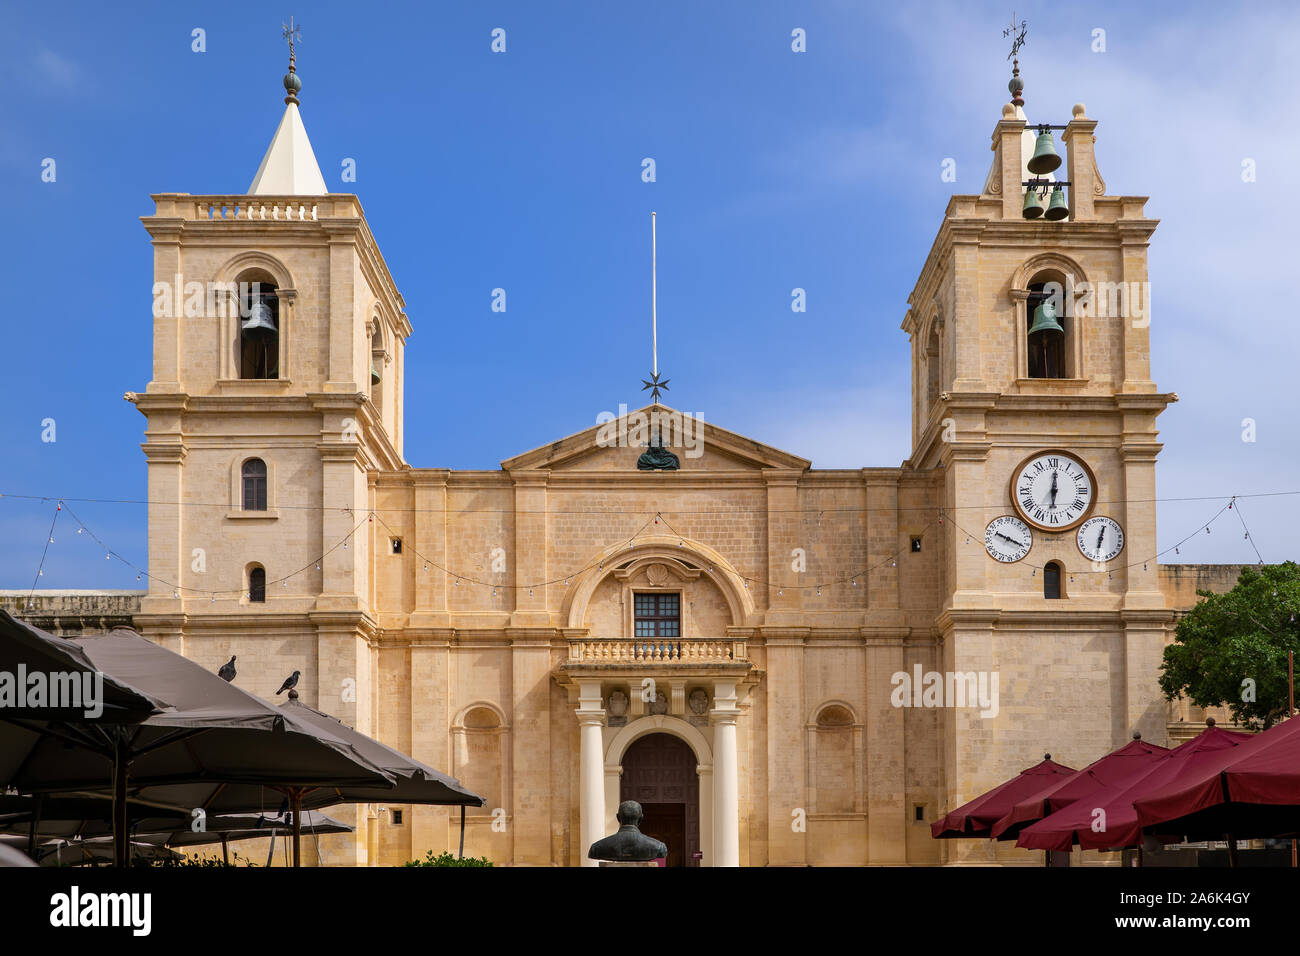 Co-Cathedral of St. John in Valletta, Malta, Cathedral Church, Mannerist style city landmark. Stock Photo